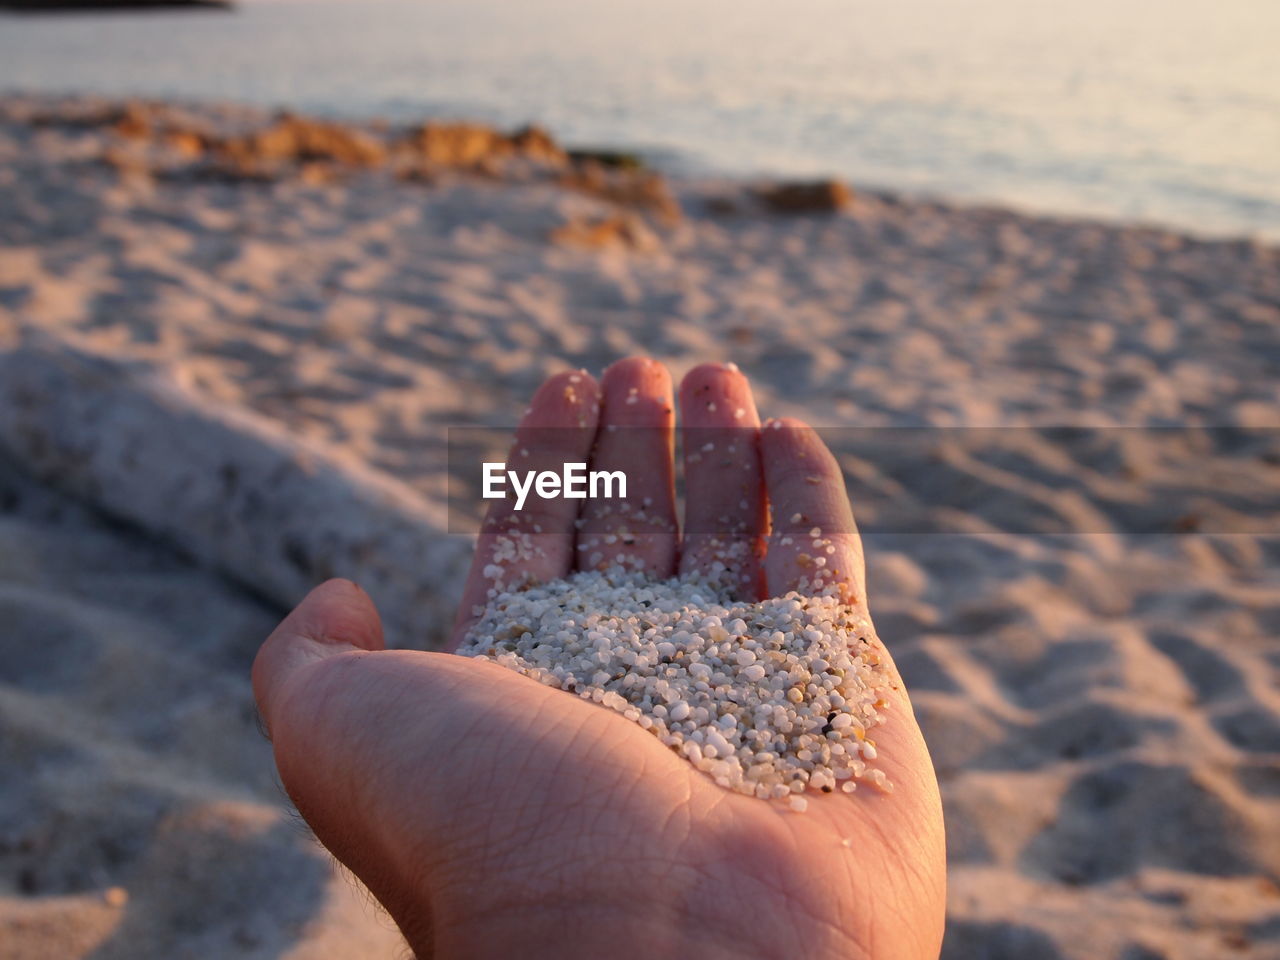 Cropped image of hand holding sand at beach